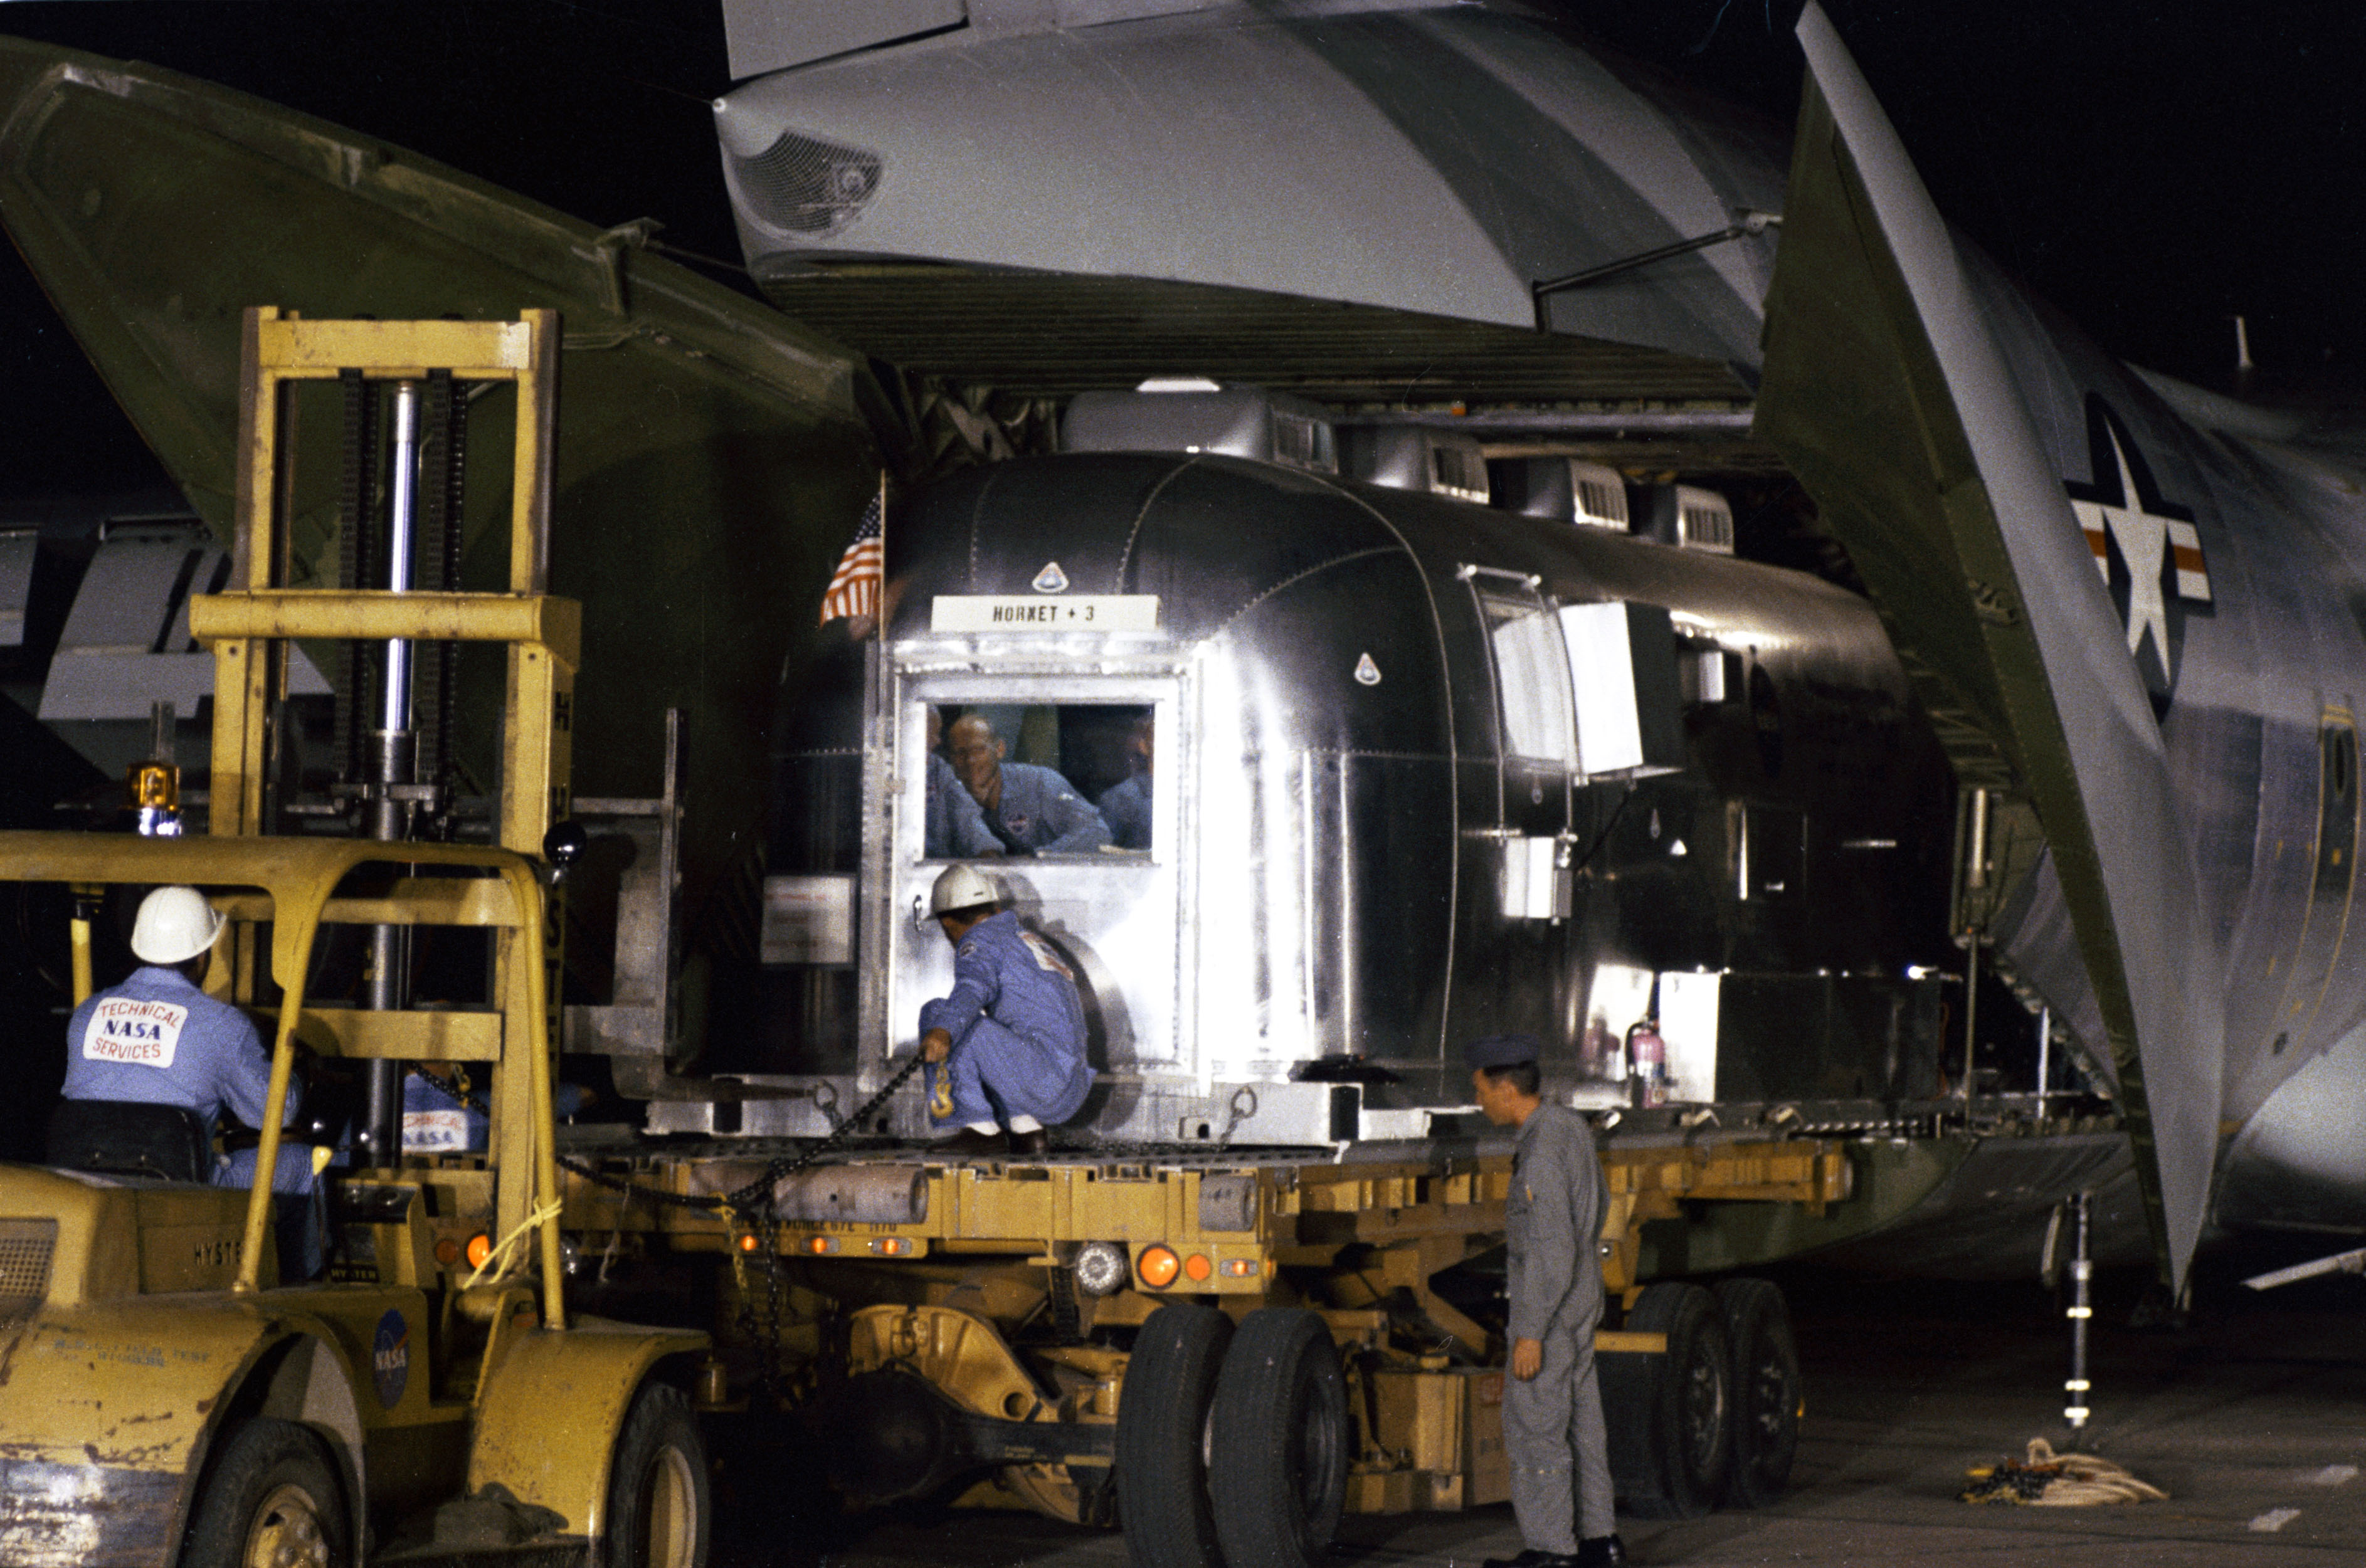 Workers unload the MQF at Houston’s Ellington AFB